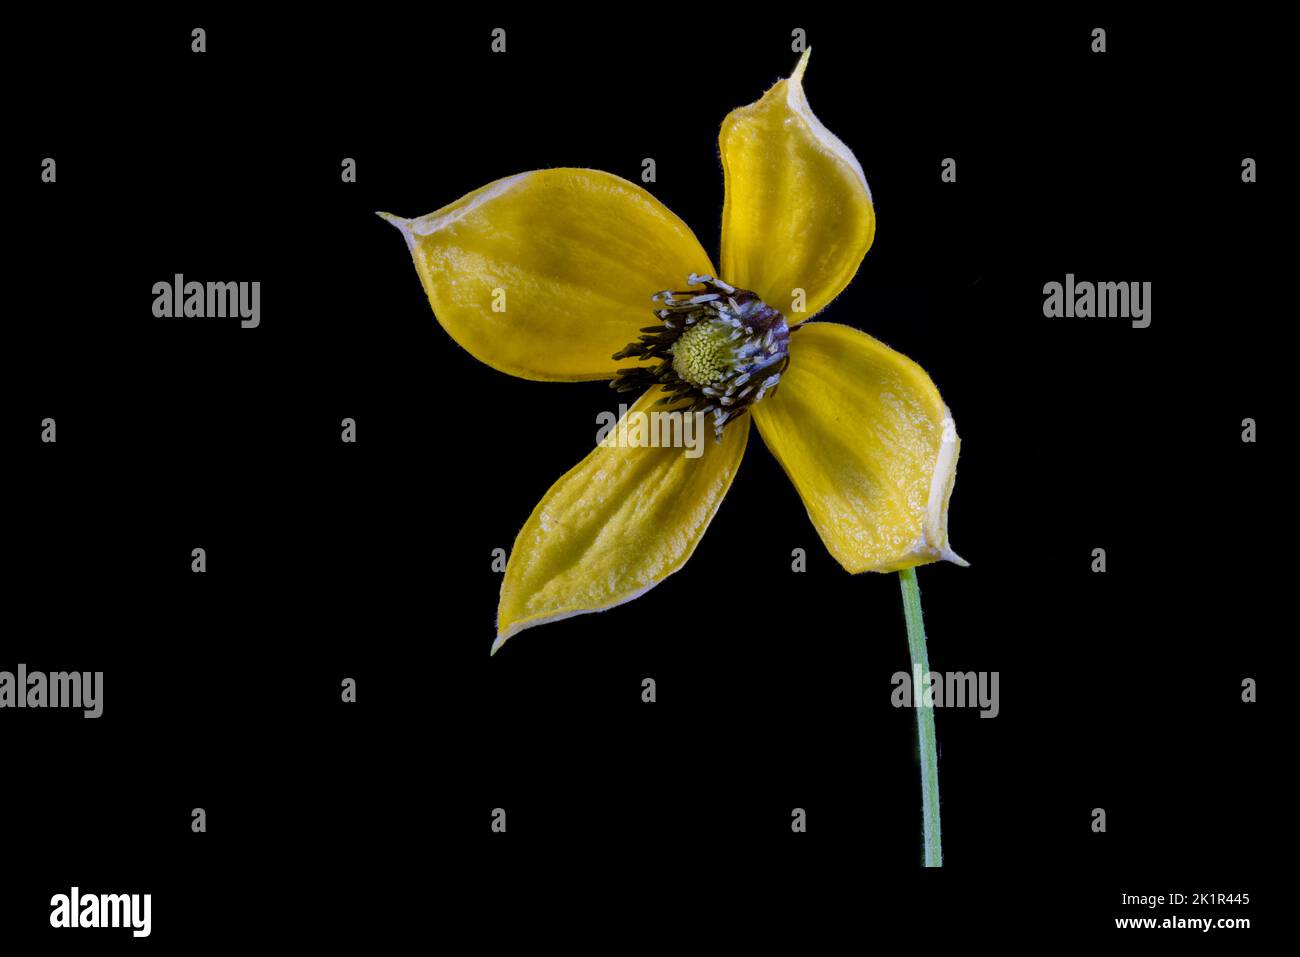 A beautiful Clematis Tangutica flower showing its beautiful yellow petals and purple centre, photographed against a plain black background Stock Photo